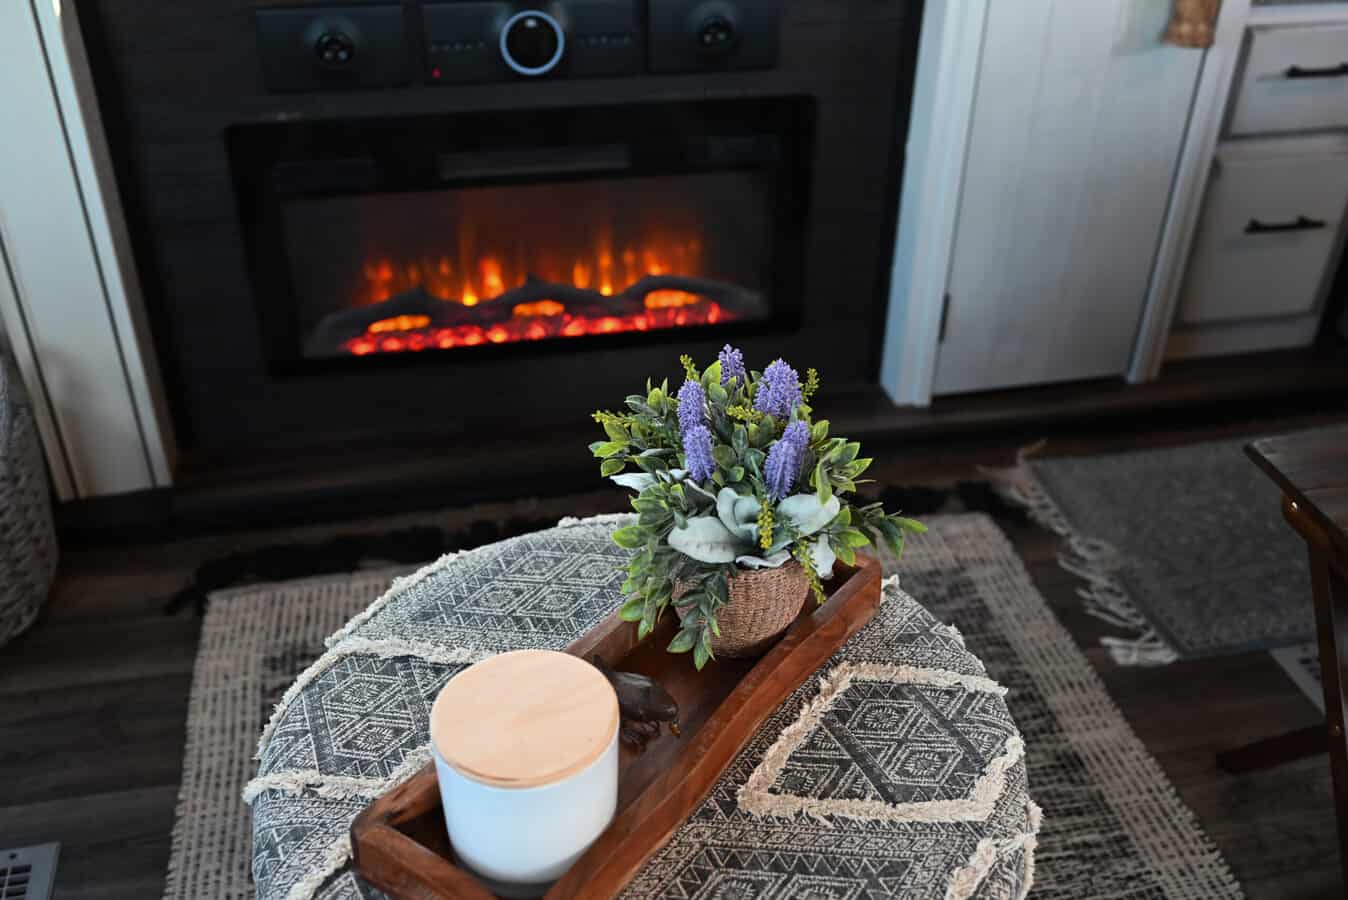 An electric RV fireplace burns in a cozy 5th wheel